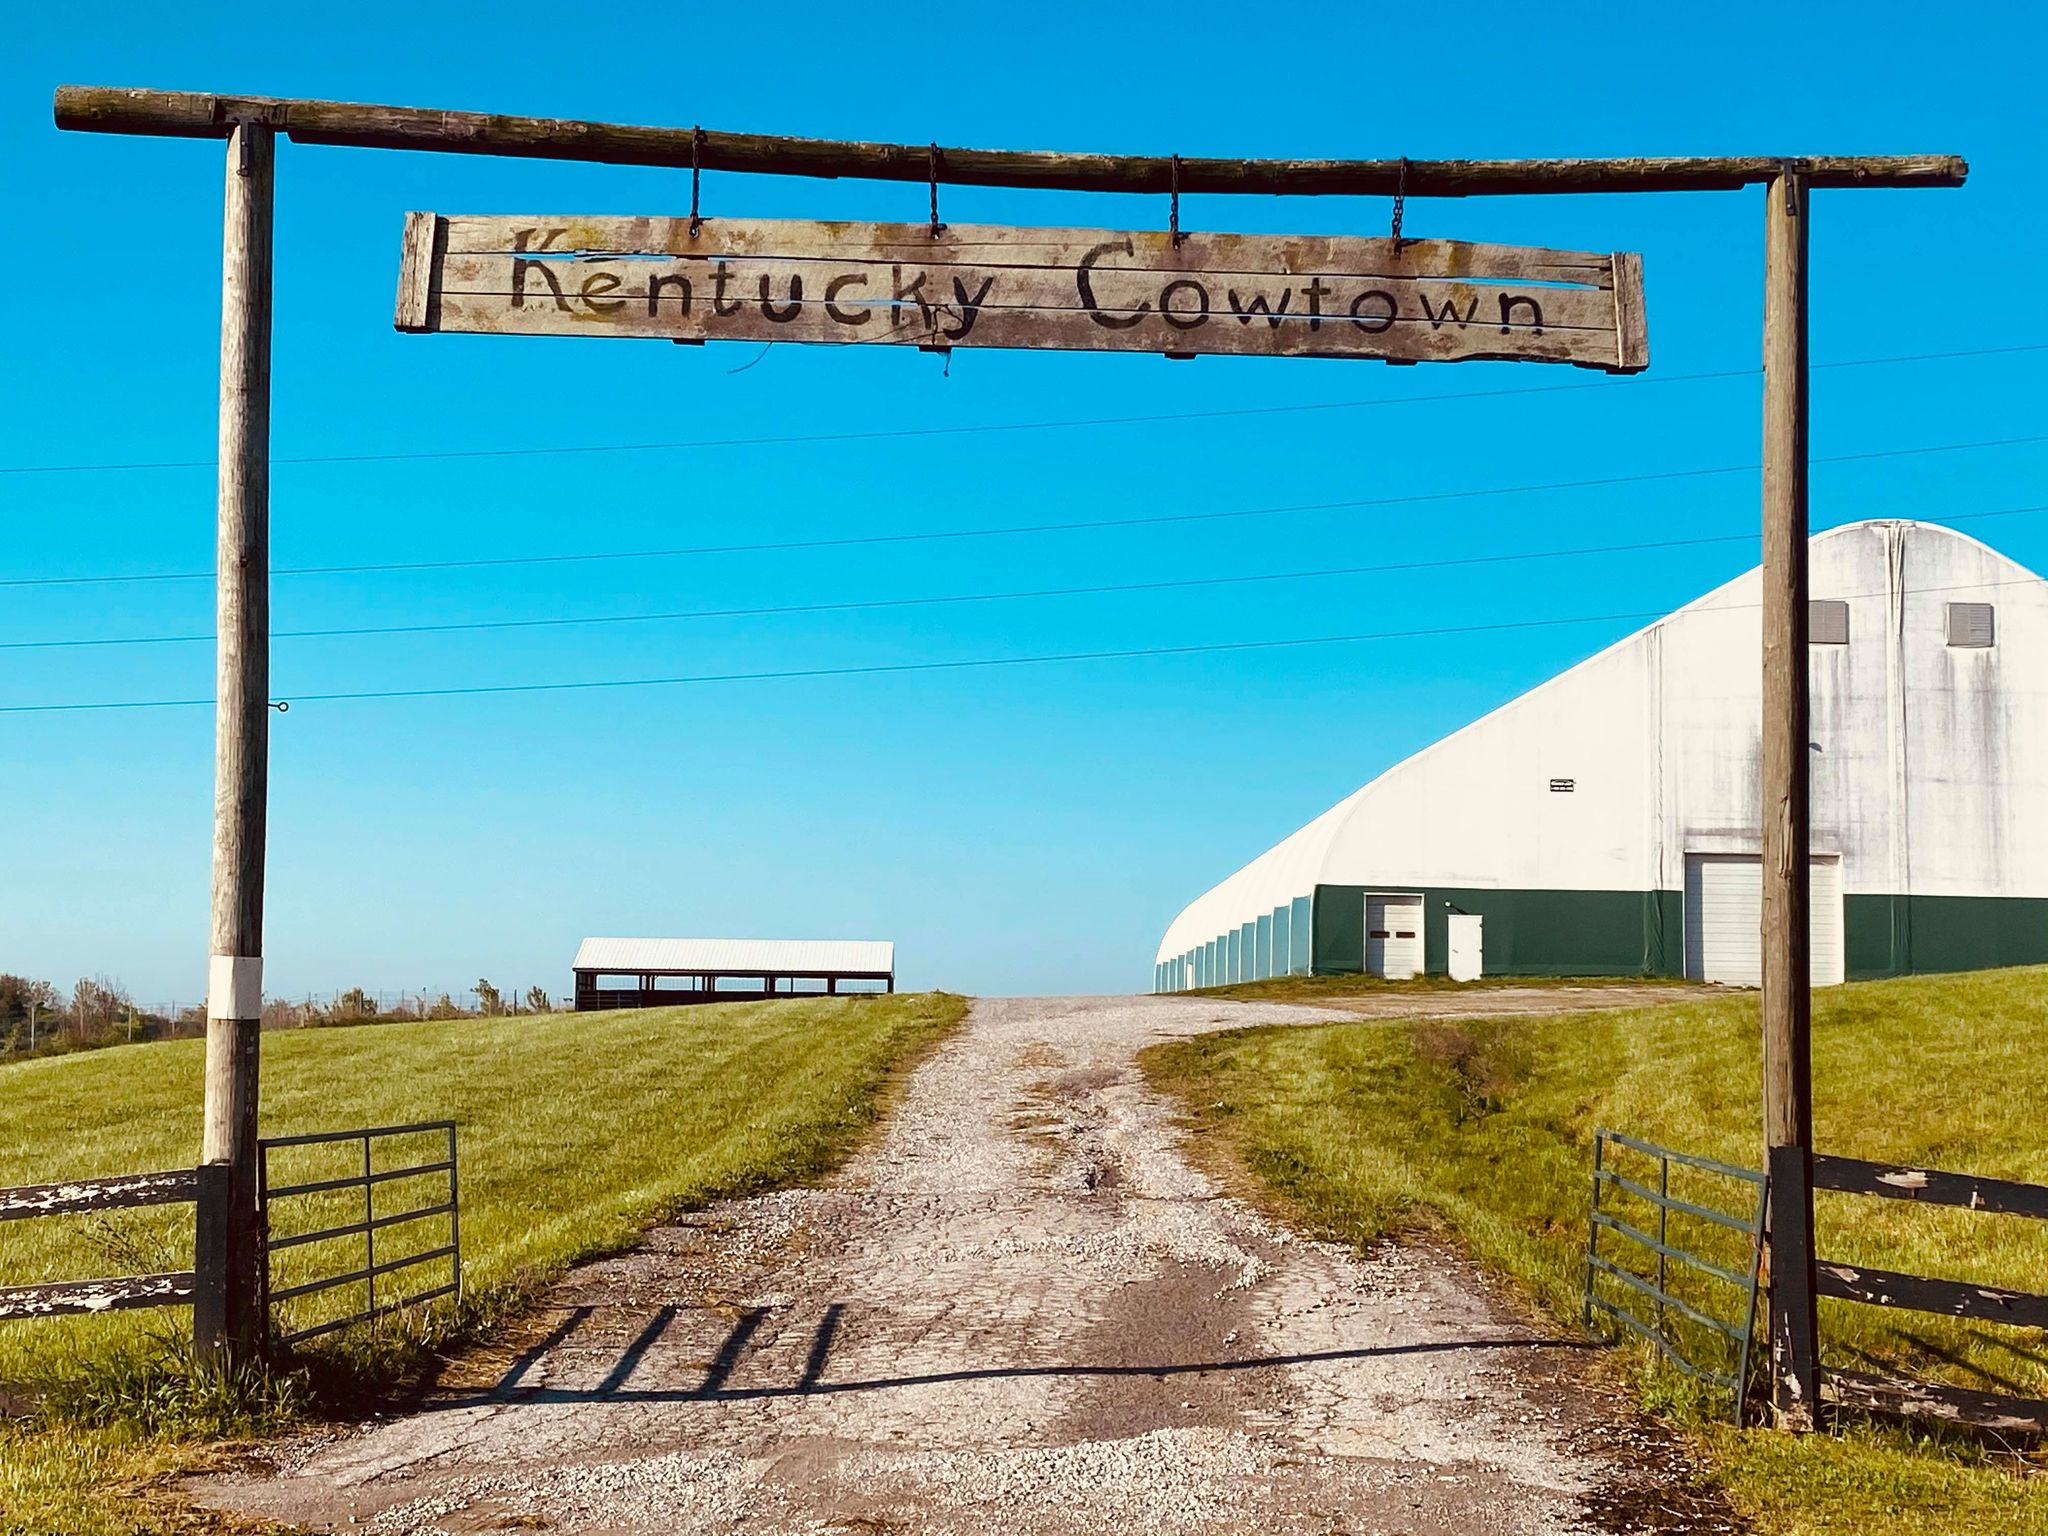 kentucky cowtown entrance sign post